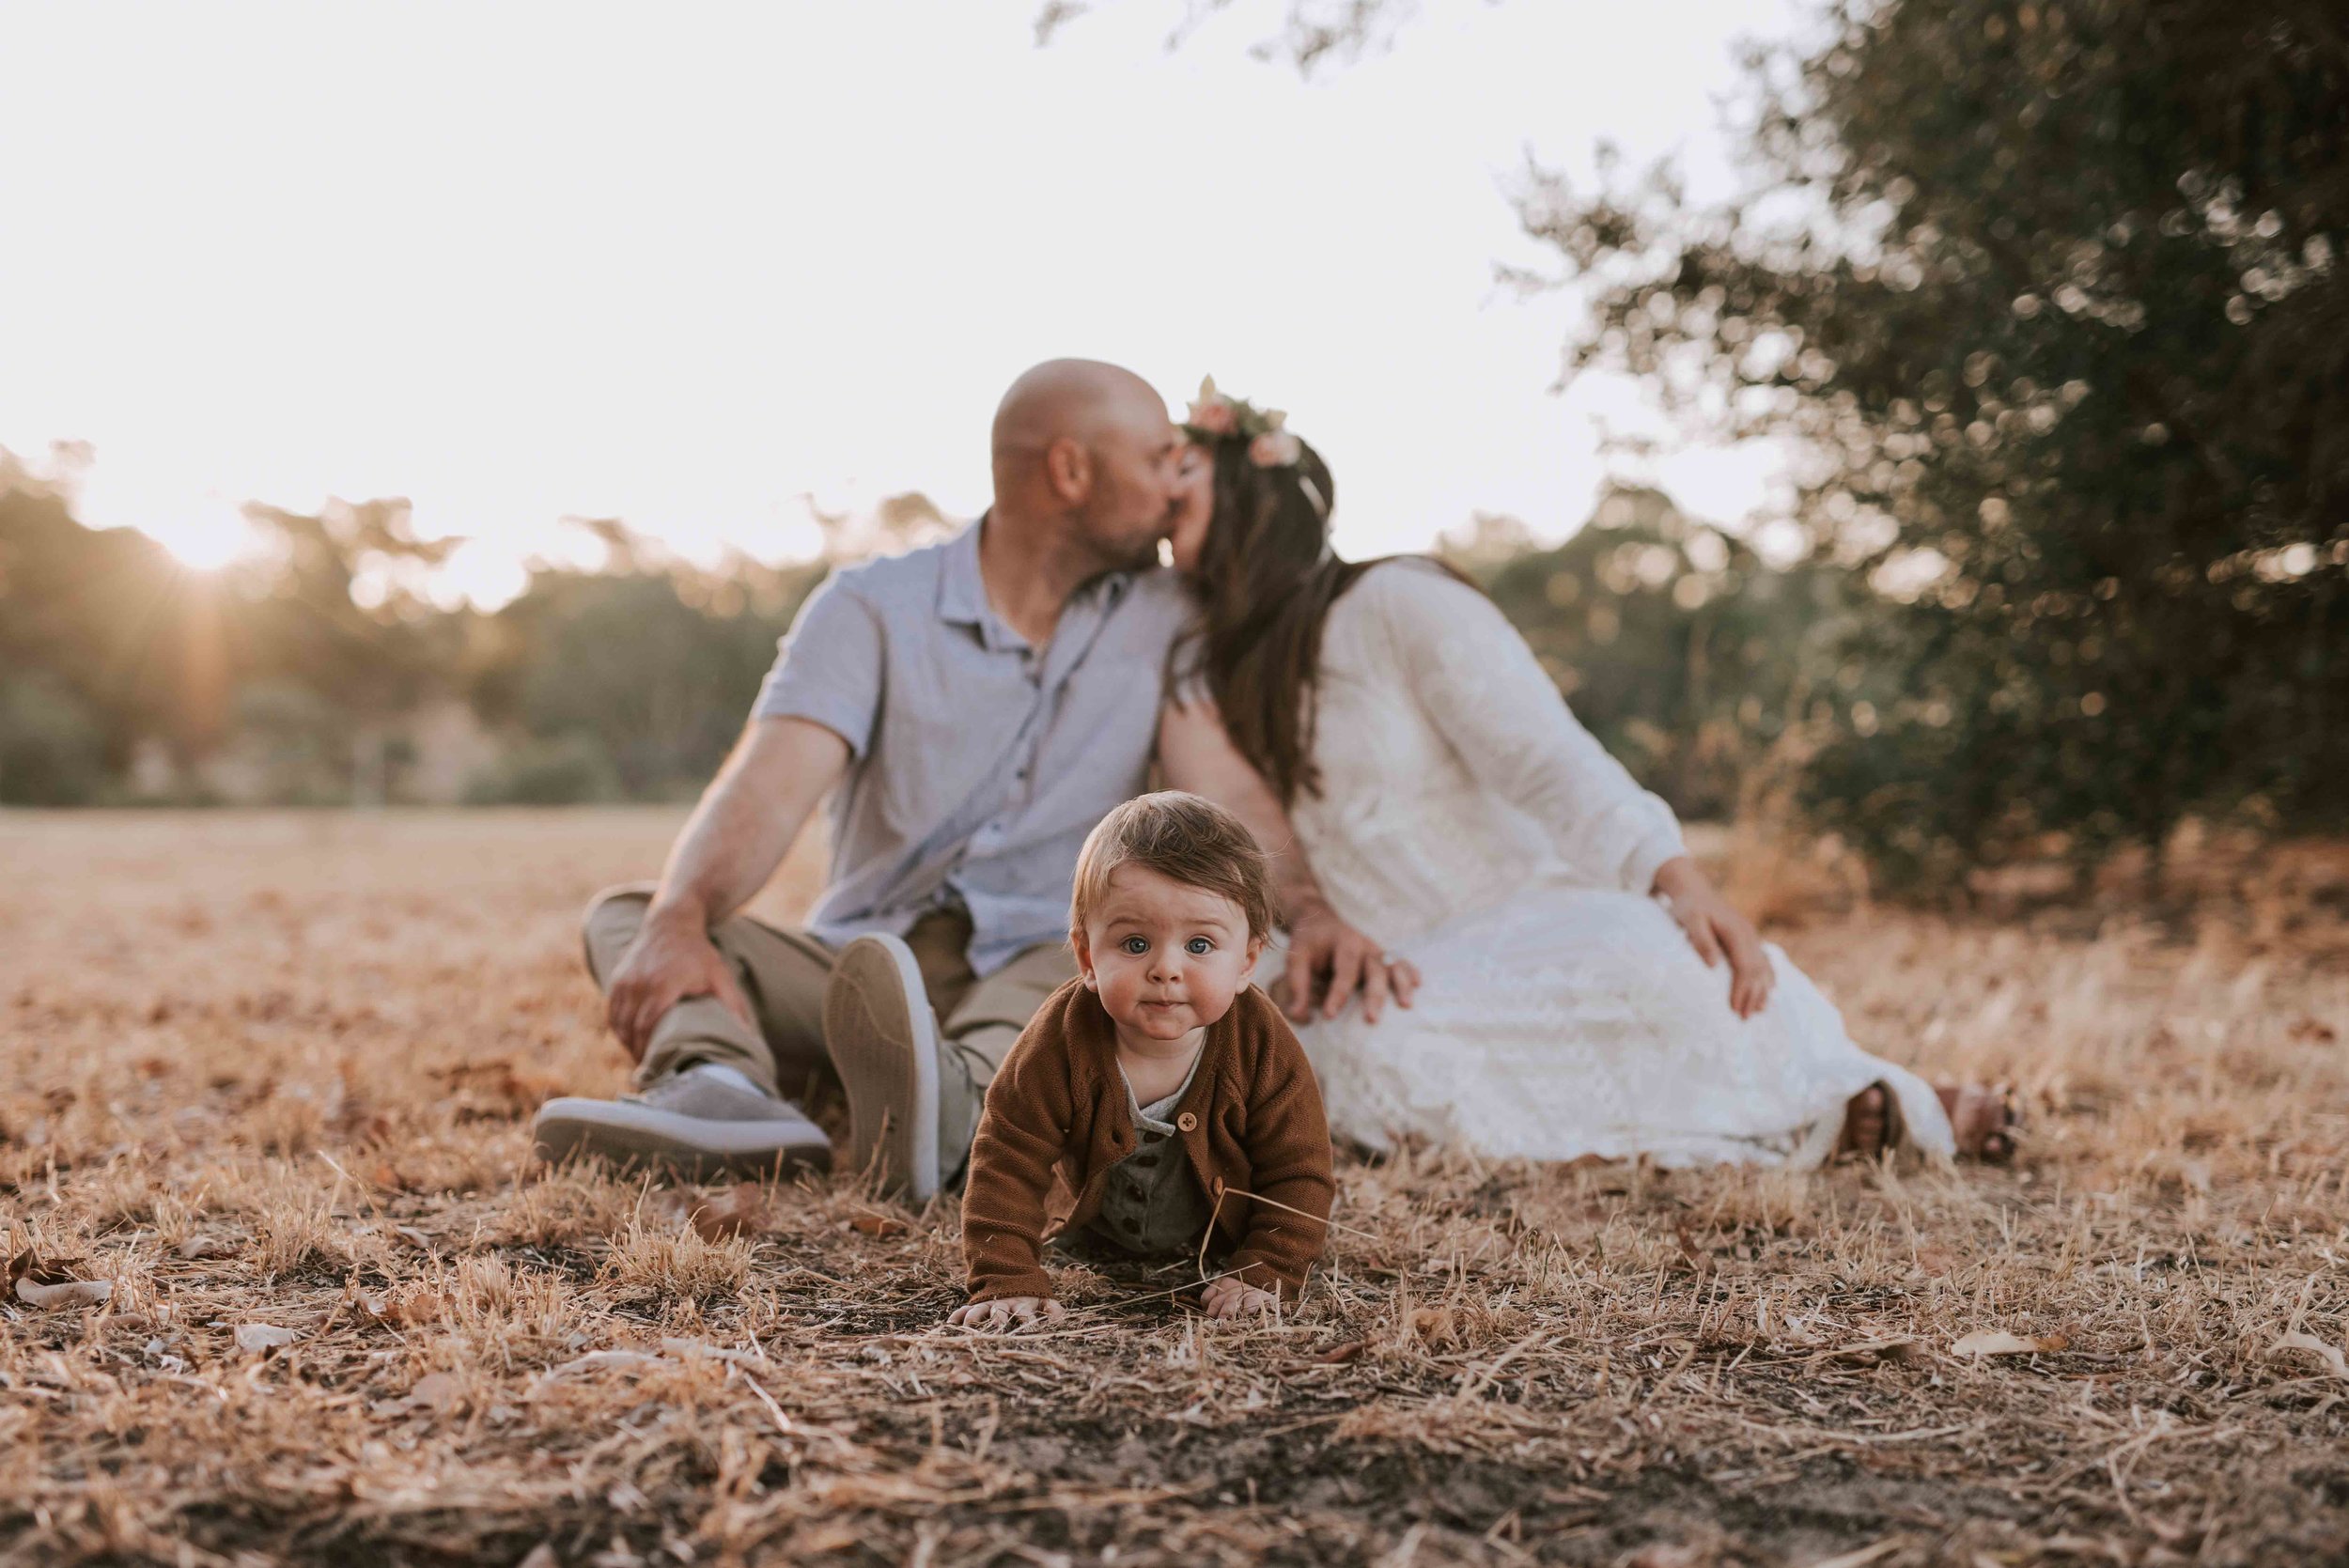 cassie family session 9.2.19 small-100.jpg